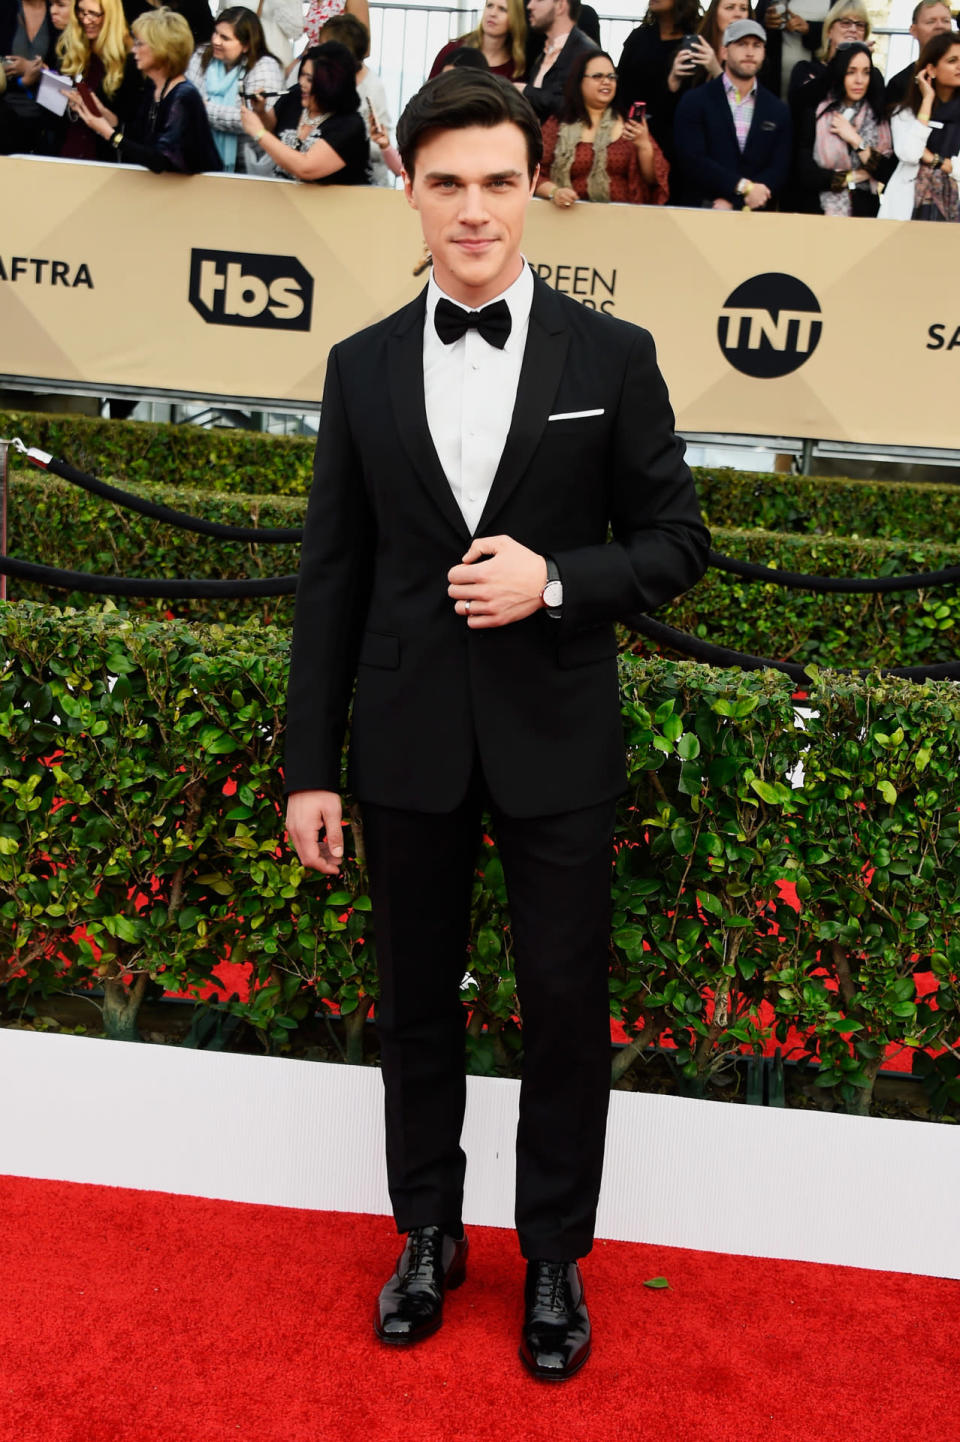 Finn Wittock at the 22nd Annual Screen Actors Guild Awards at The Shrine Auditorium on January 30, 2016 in Los Angeles, California.